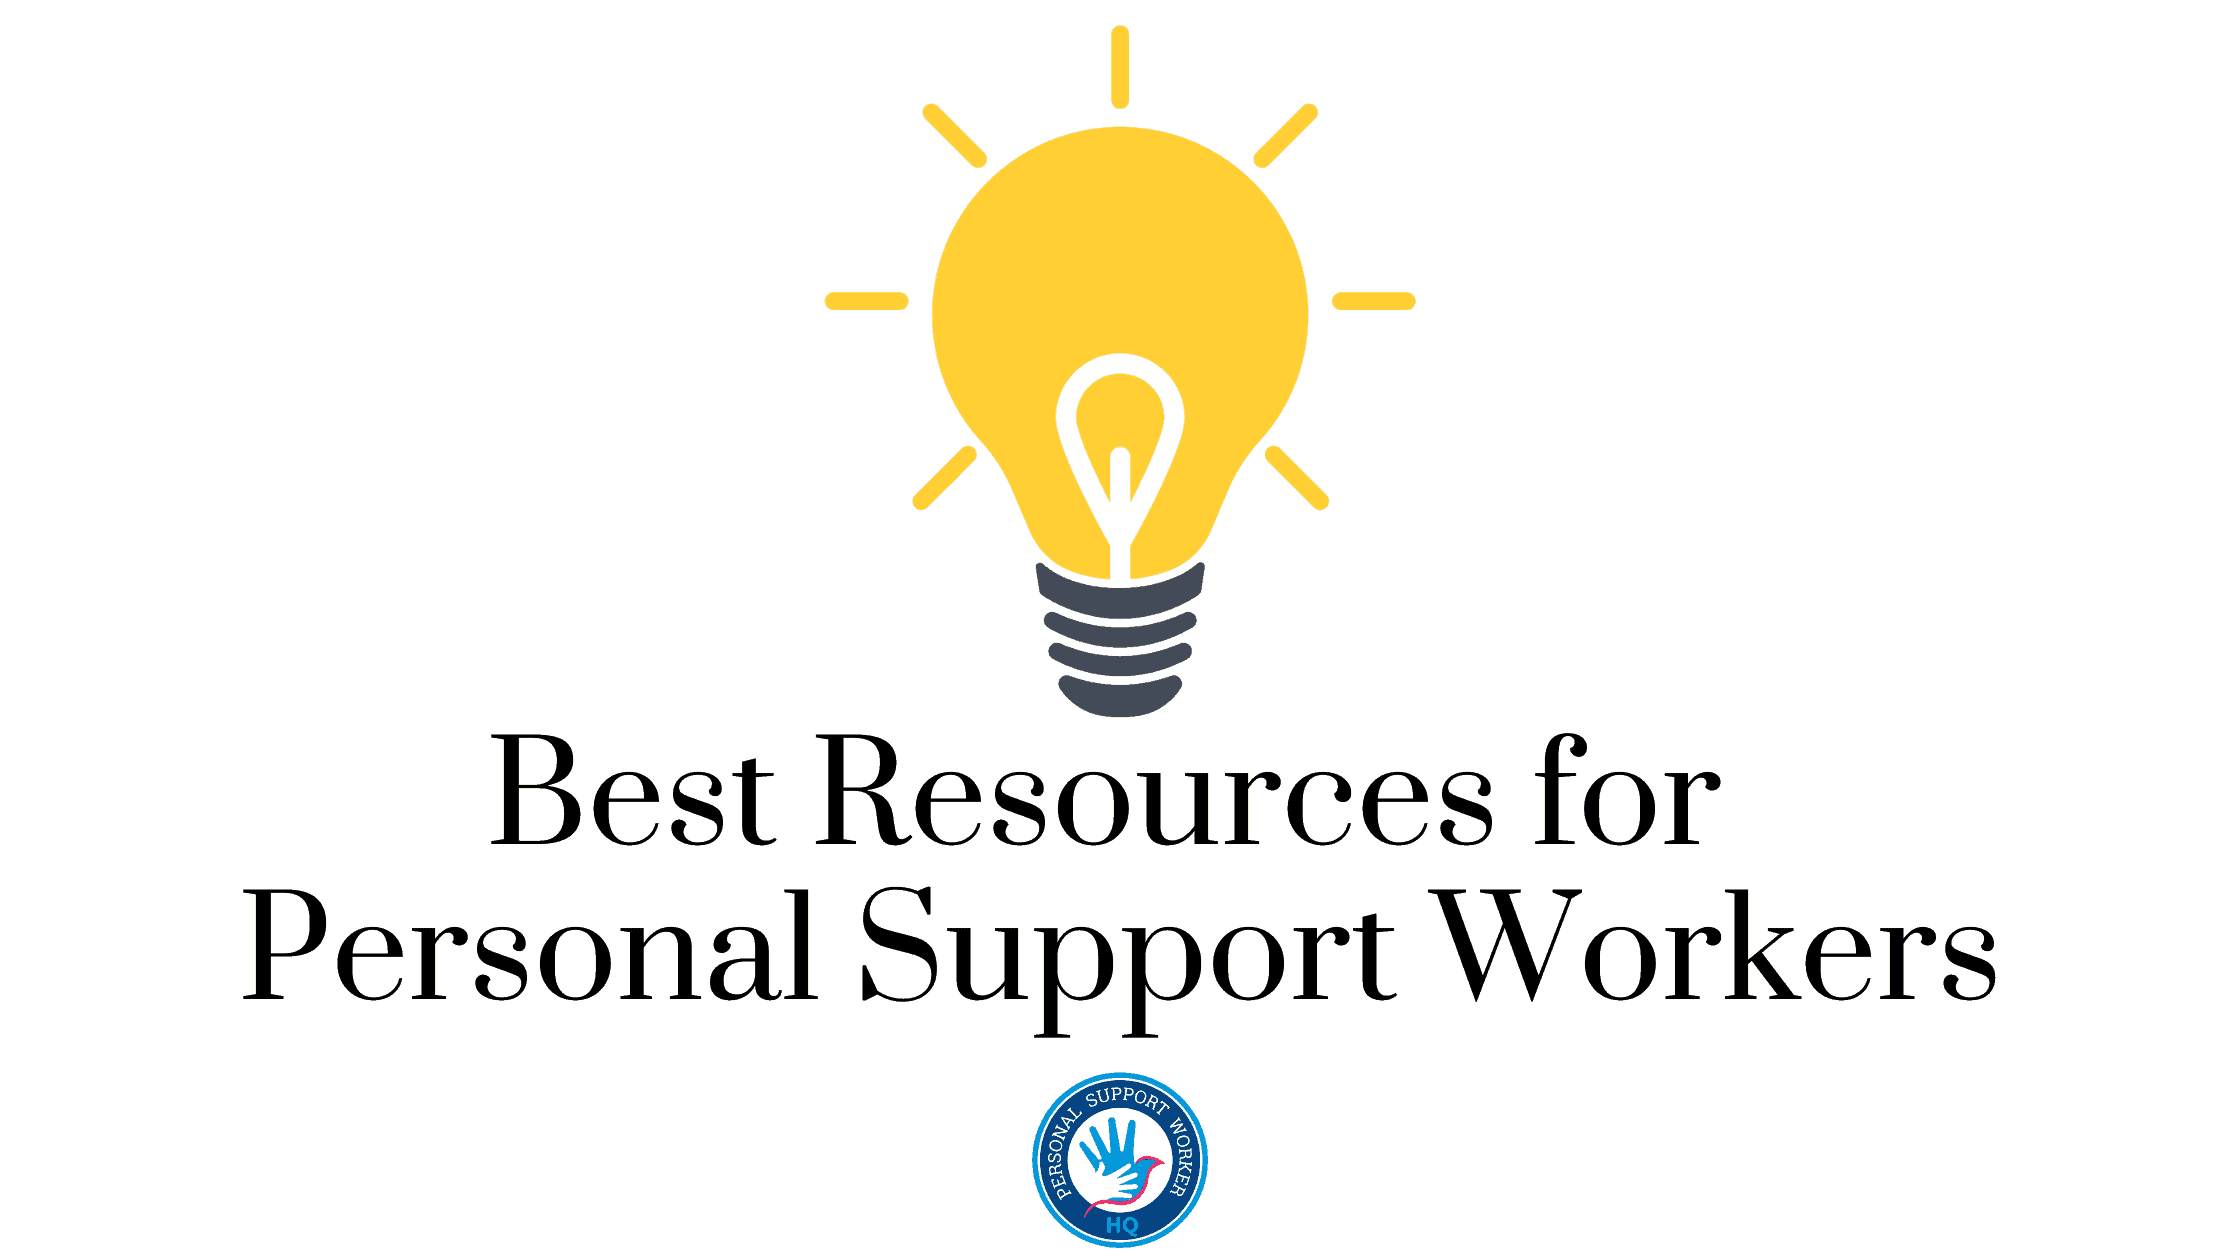 List of Best Resources for Personal Support Workers. 